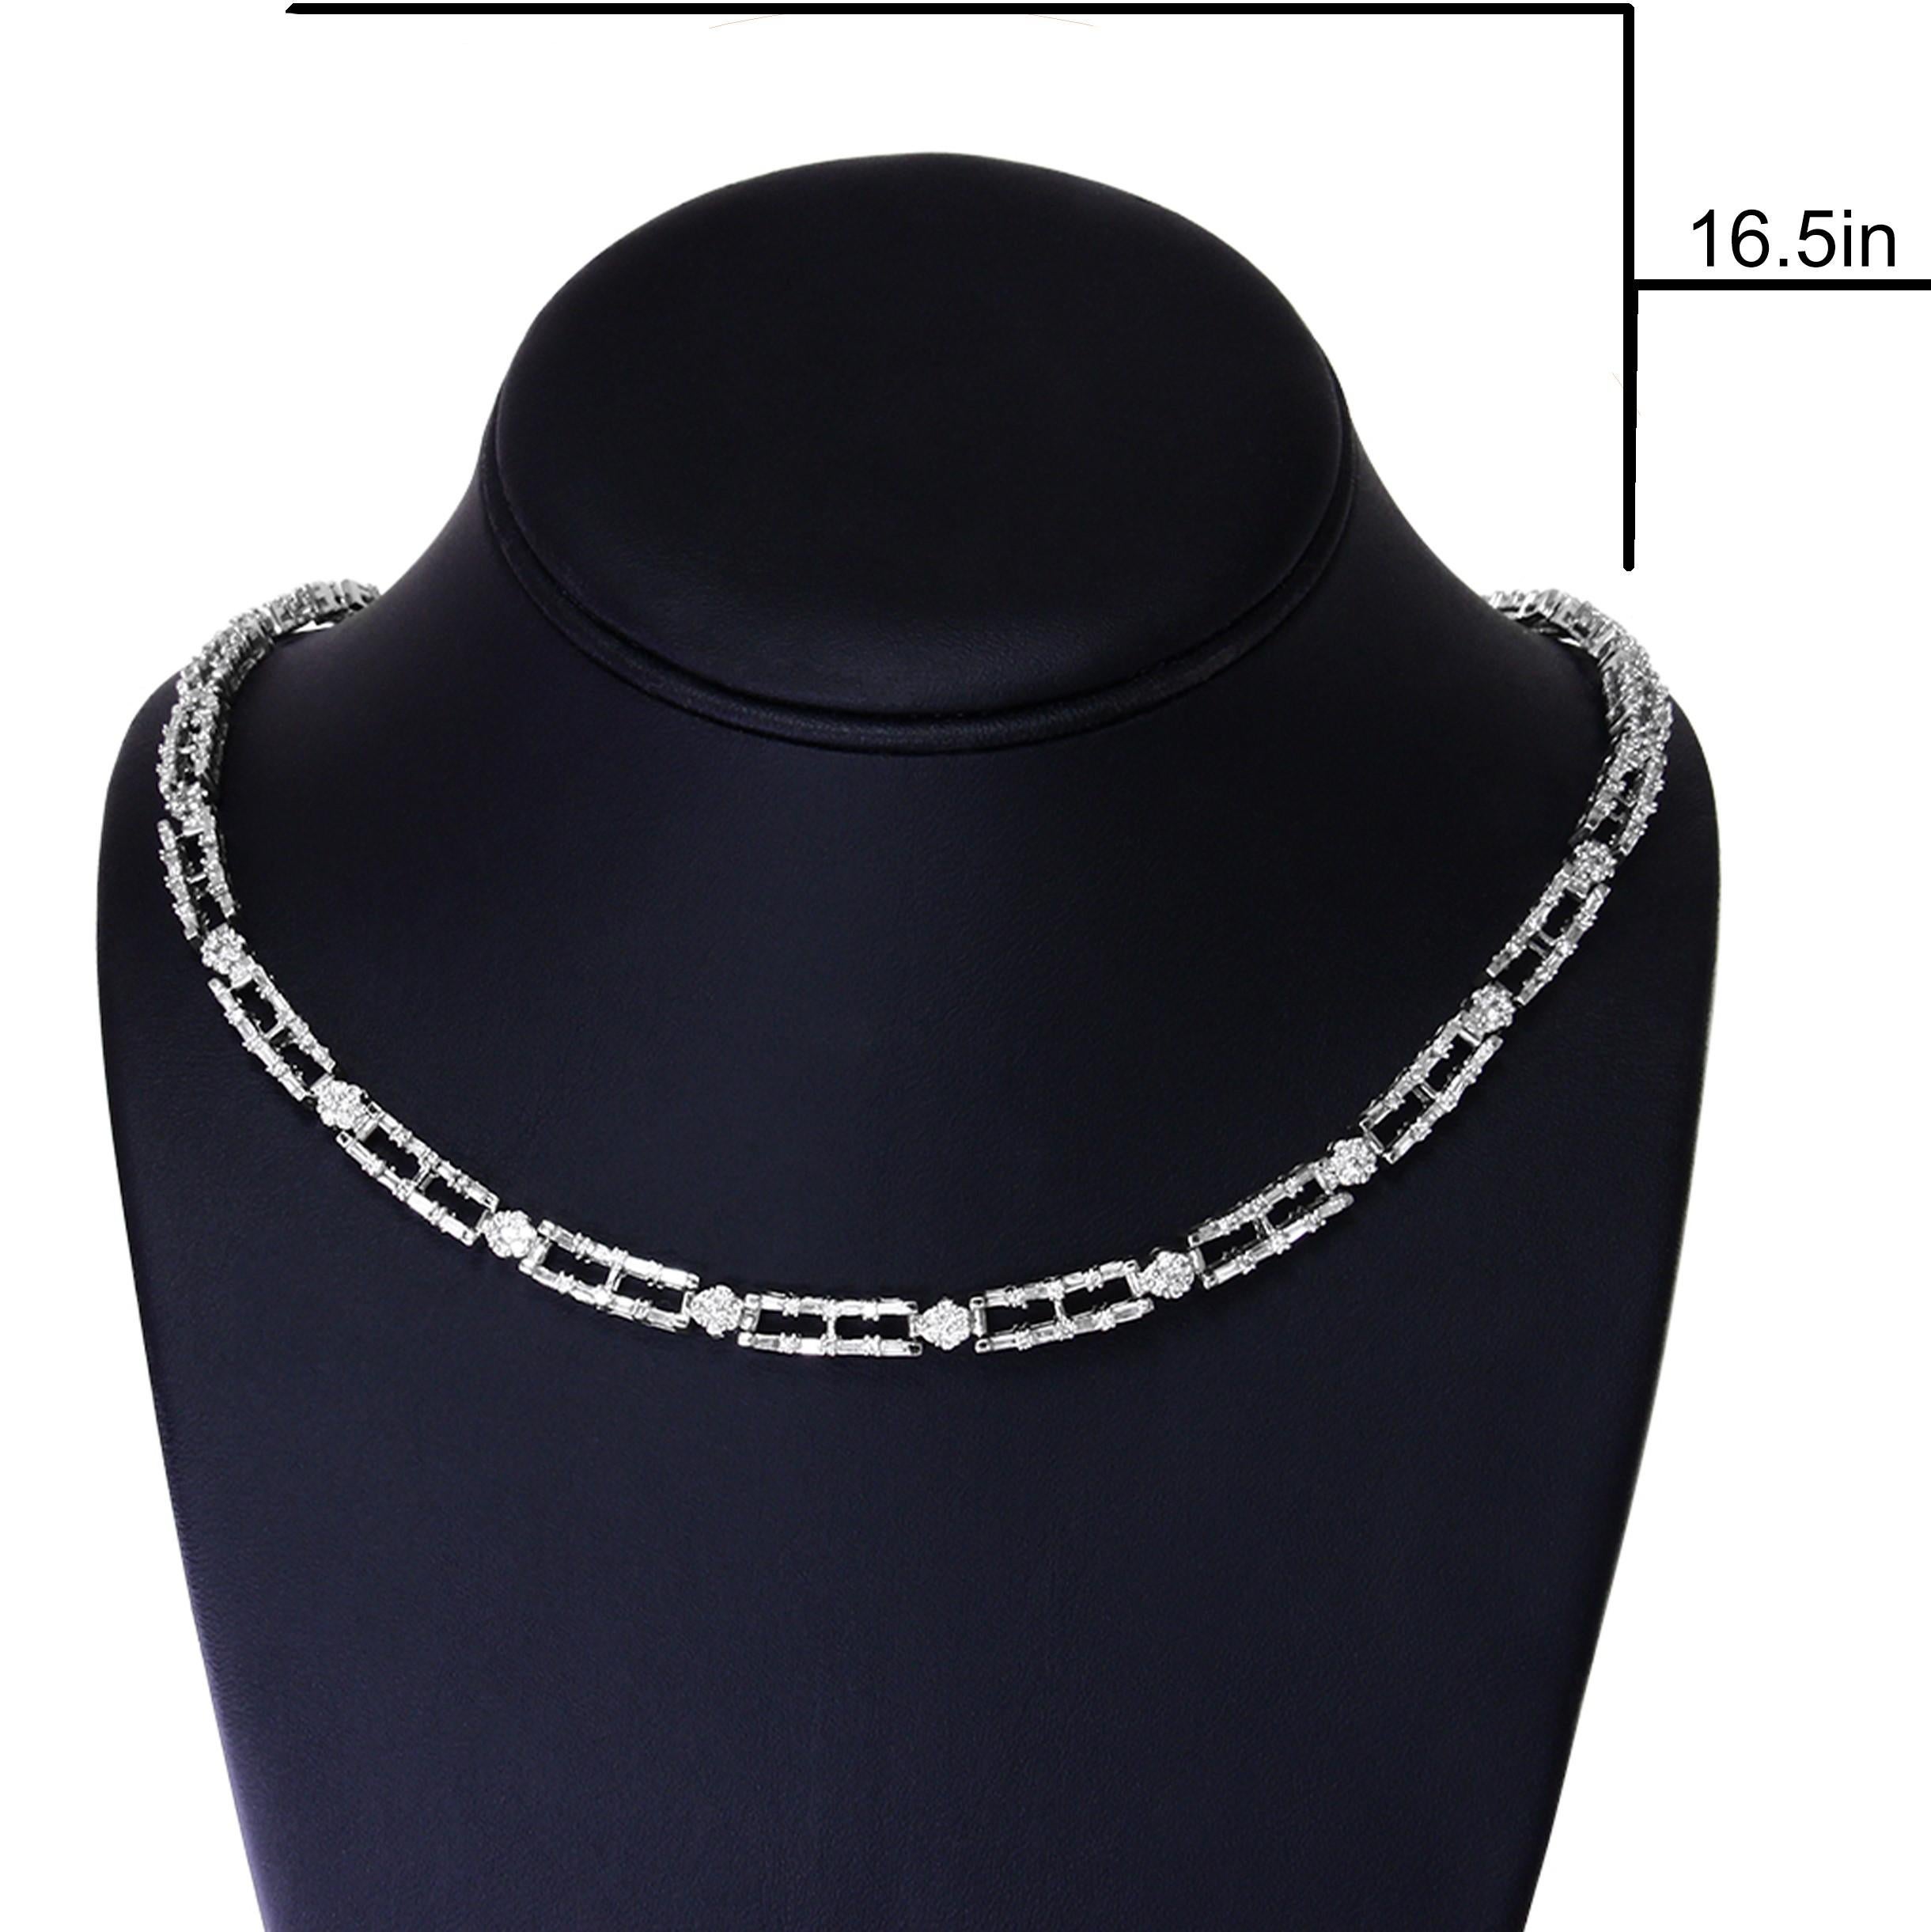 AGS Certified 14K White Gold 8 1/2 Carat Diamond Cluster Link Choker Necklace For Sale 1